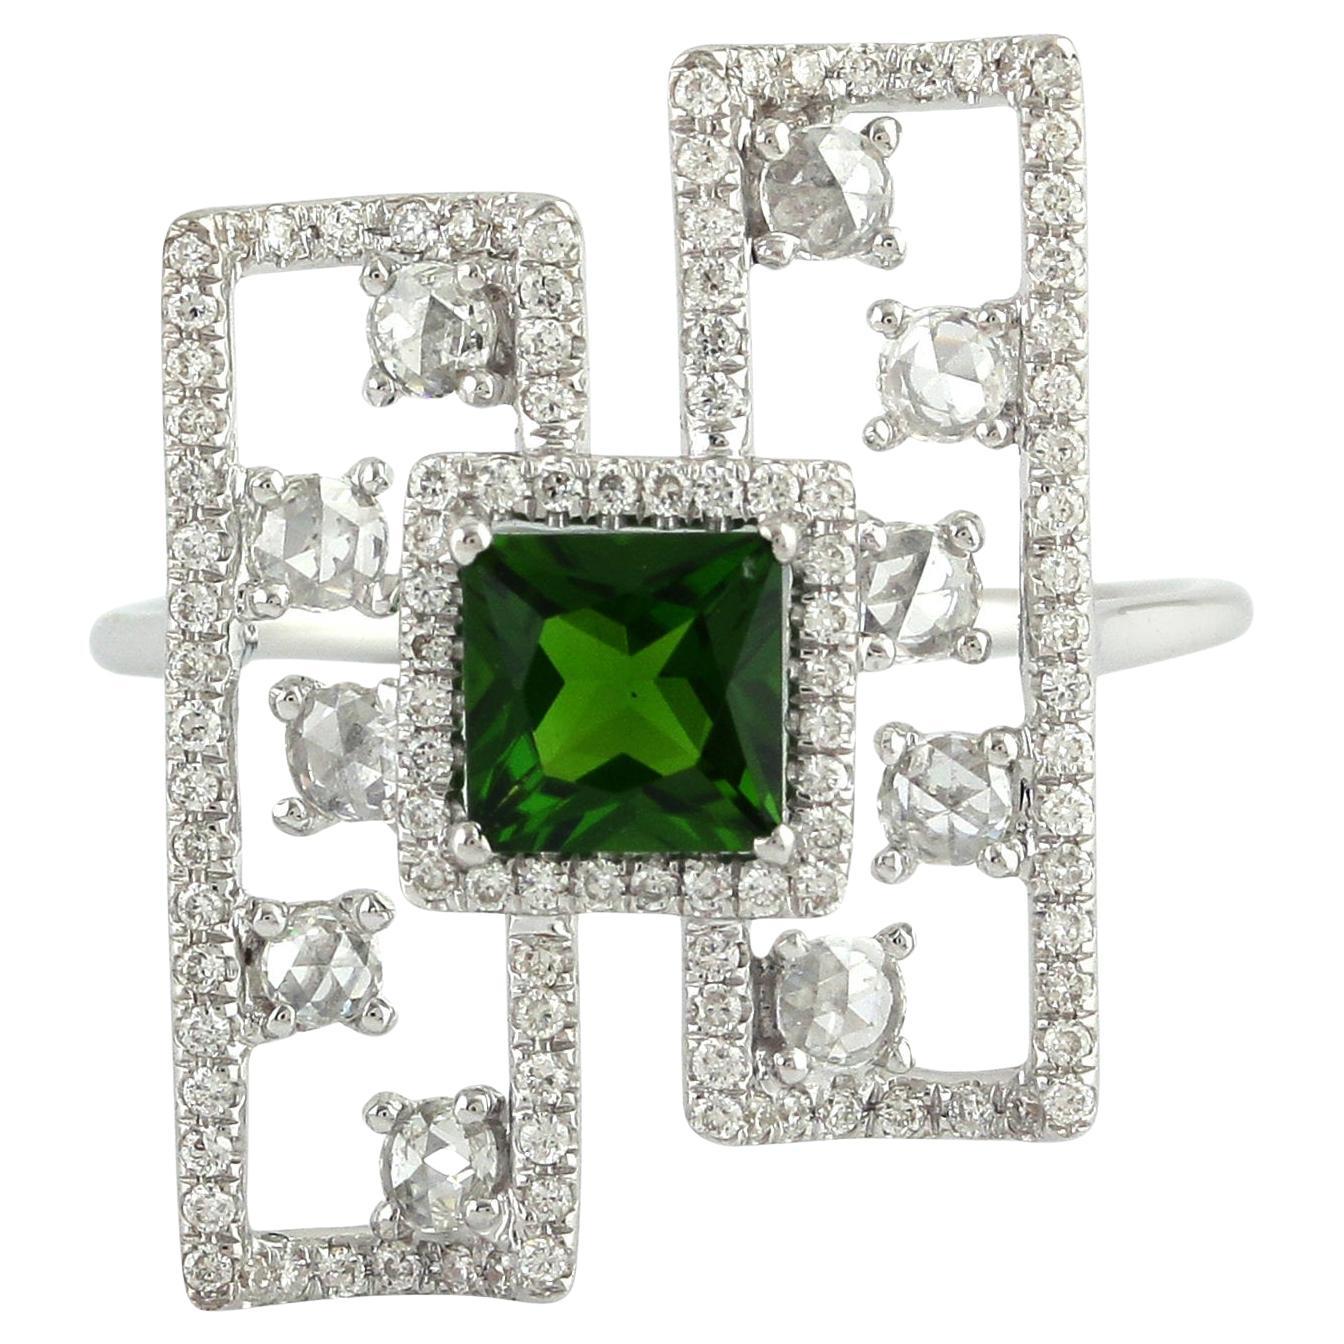 Chrome Diopside Cocktail Ring With Diamonds Made In 18k White Gold For Sale